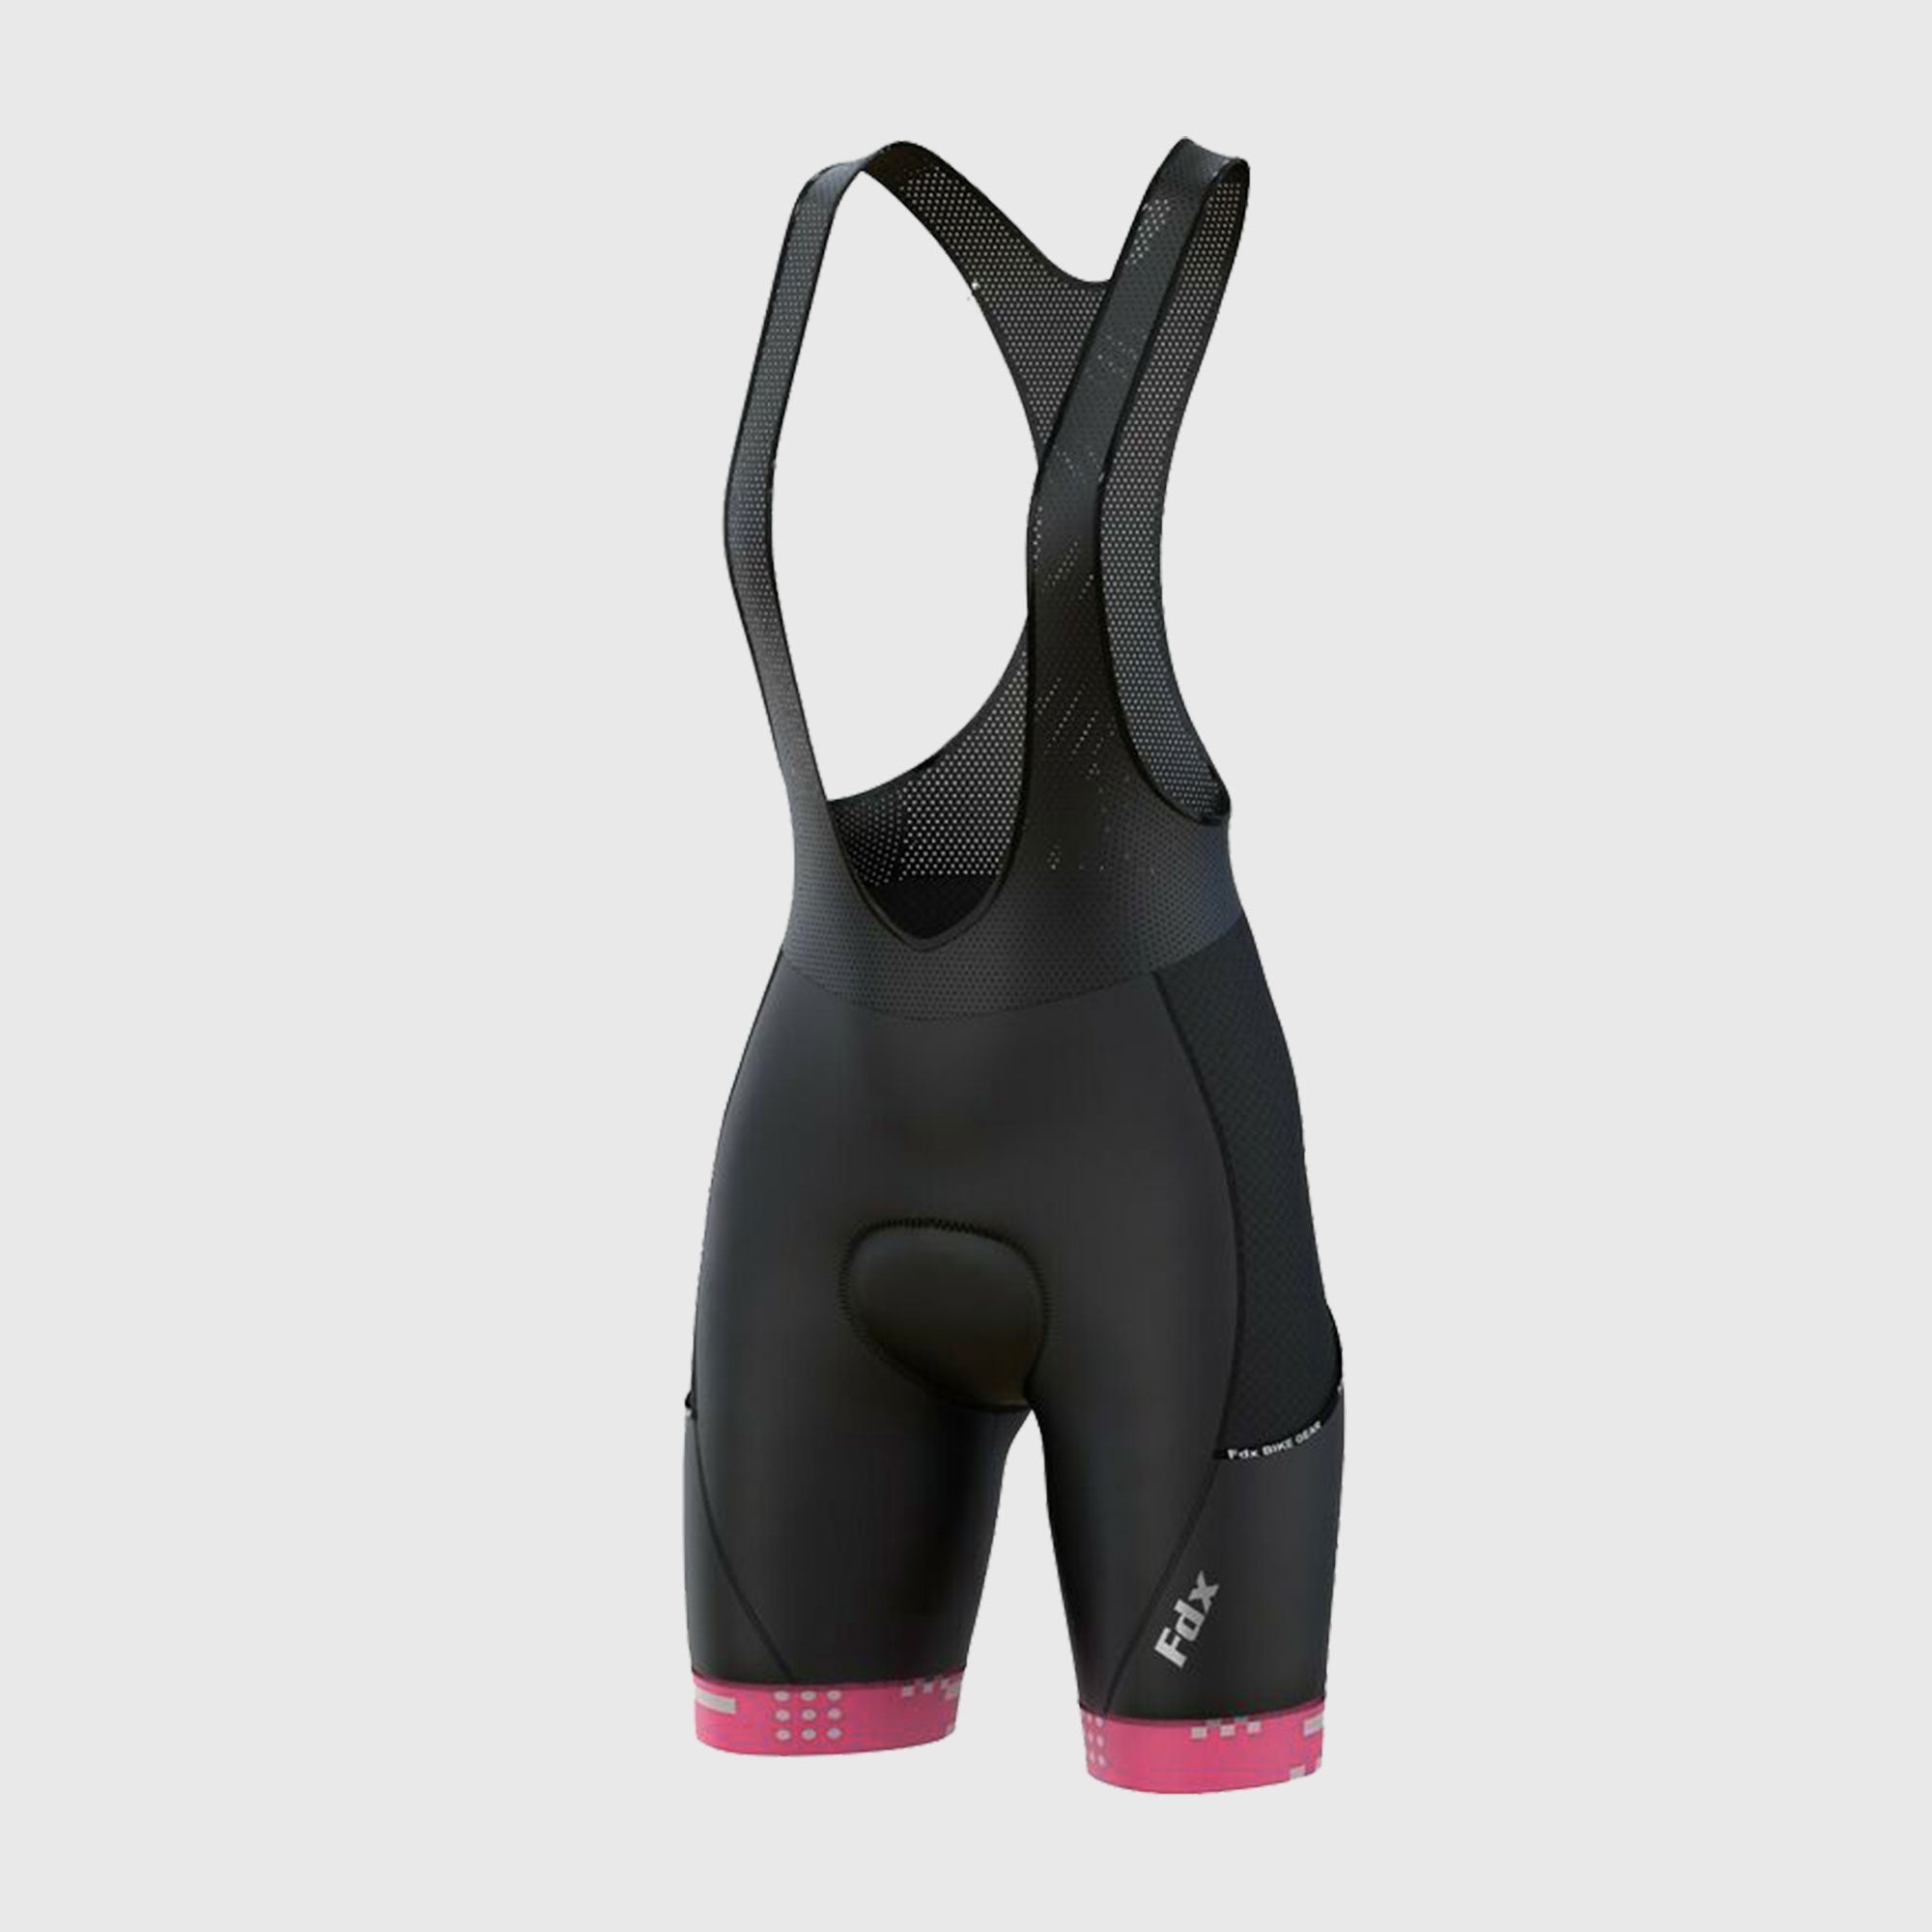 Fdx Womens Black & Pink Gel Padded Cycling Bib Shorts For Summer Best Breathable Outdoor Road Bike Short Length Bib - All Day